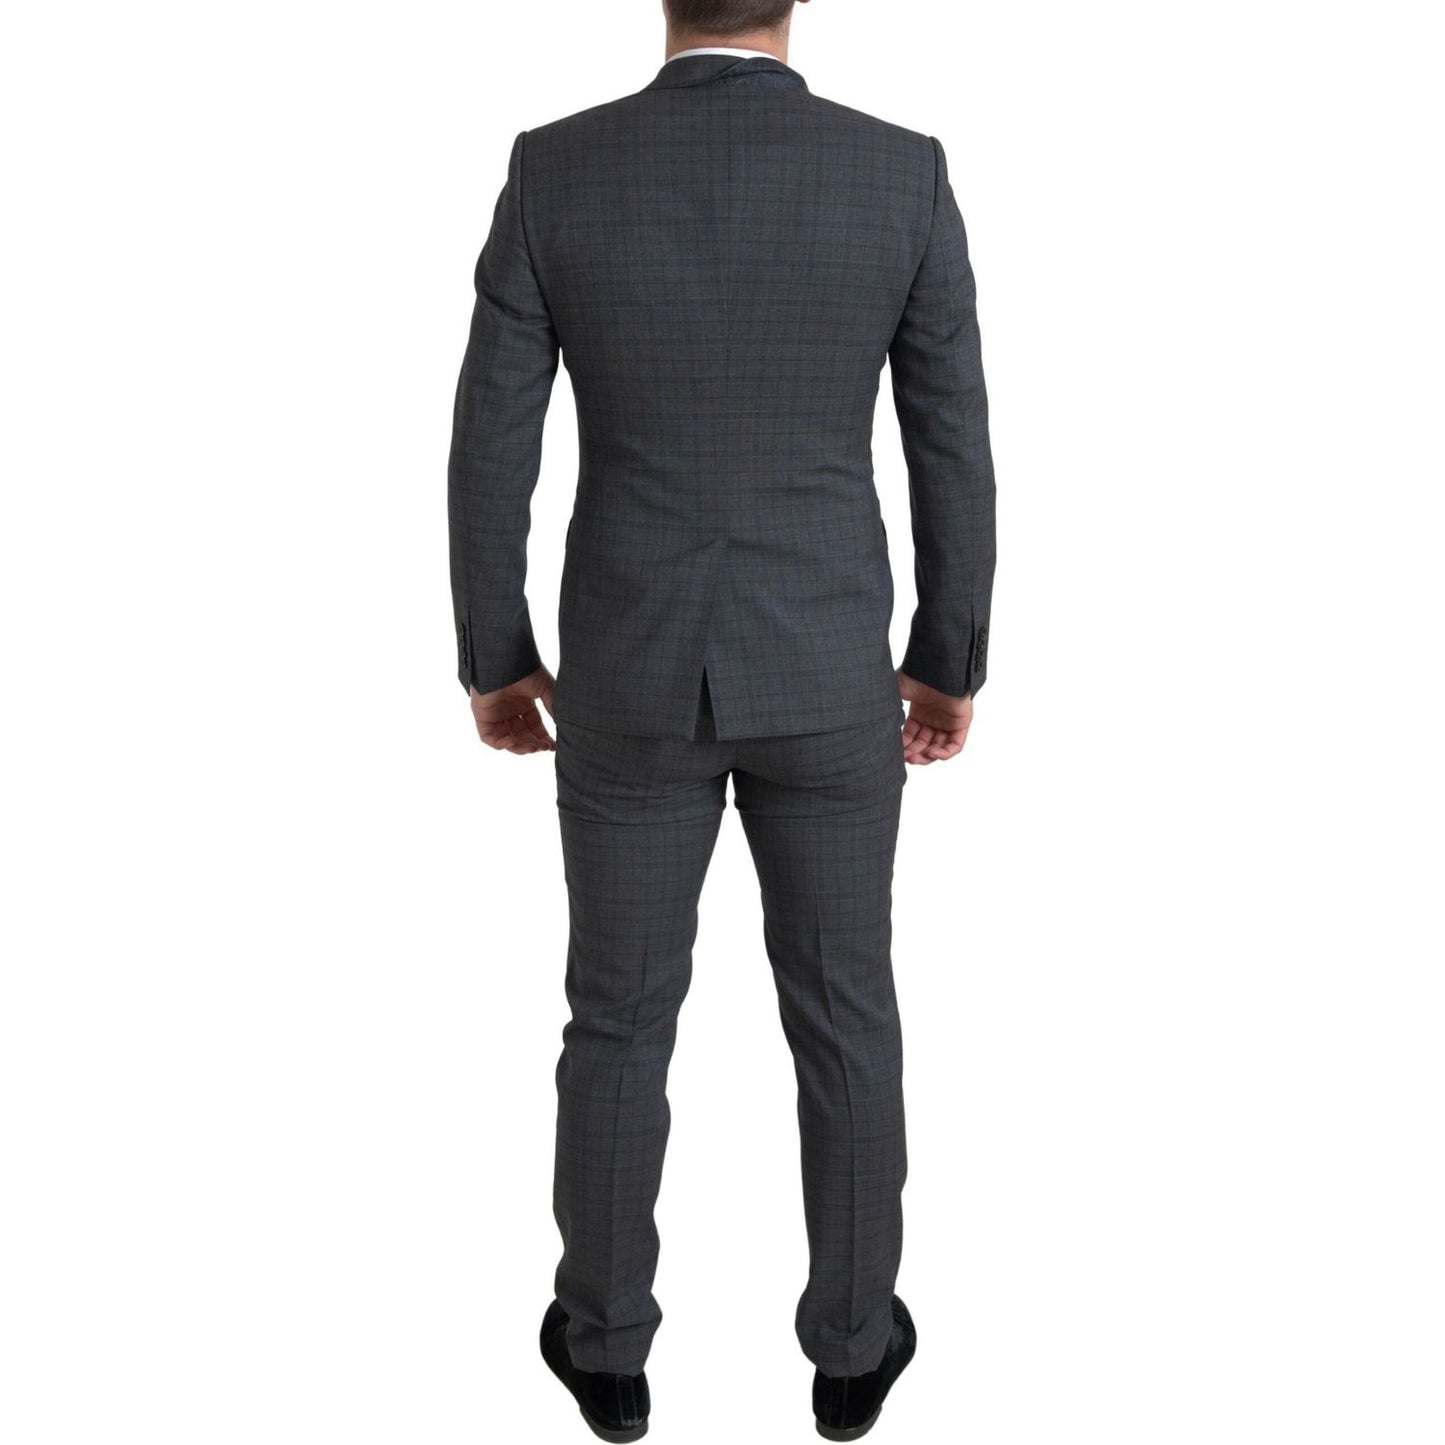 Dolce & Gabbana Elegant Grey Checkered Slim Fit Suit gray-2-piece-single-breasted-martini-suit